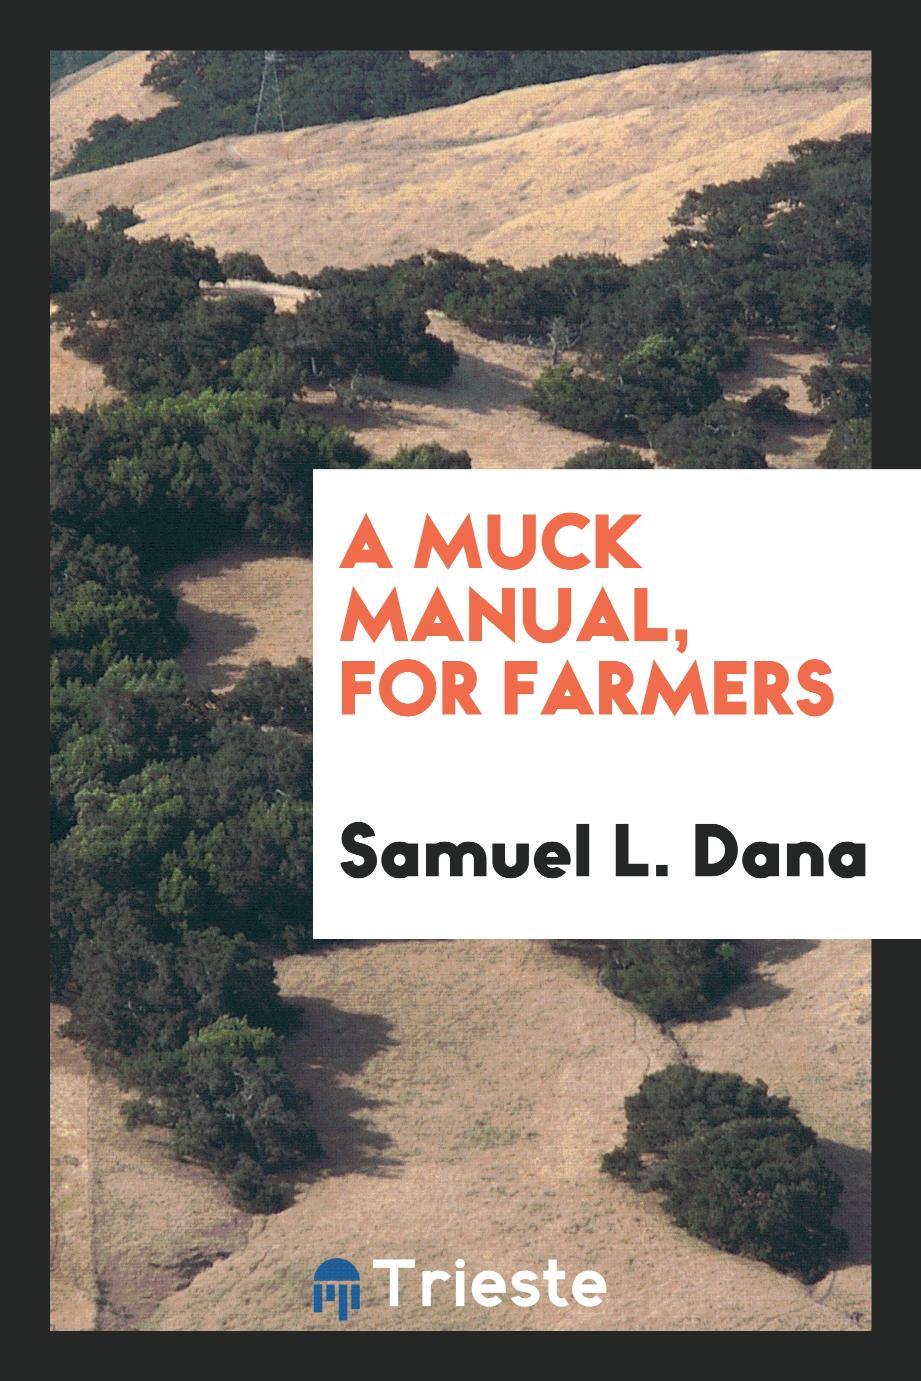 A muck manual, for farmers